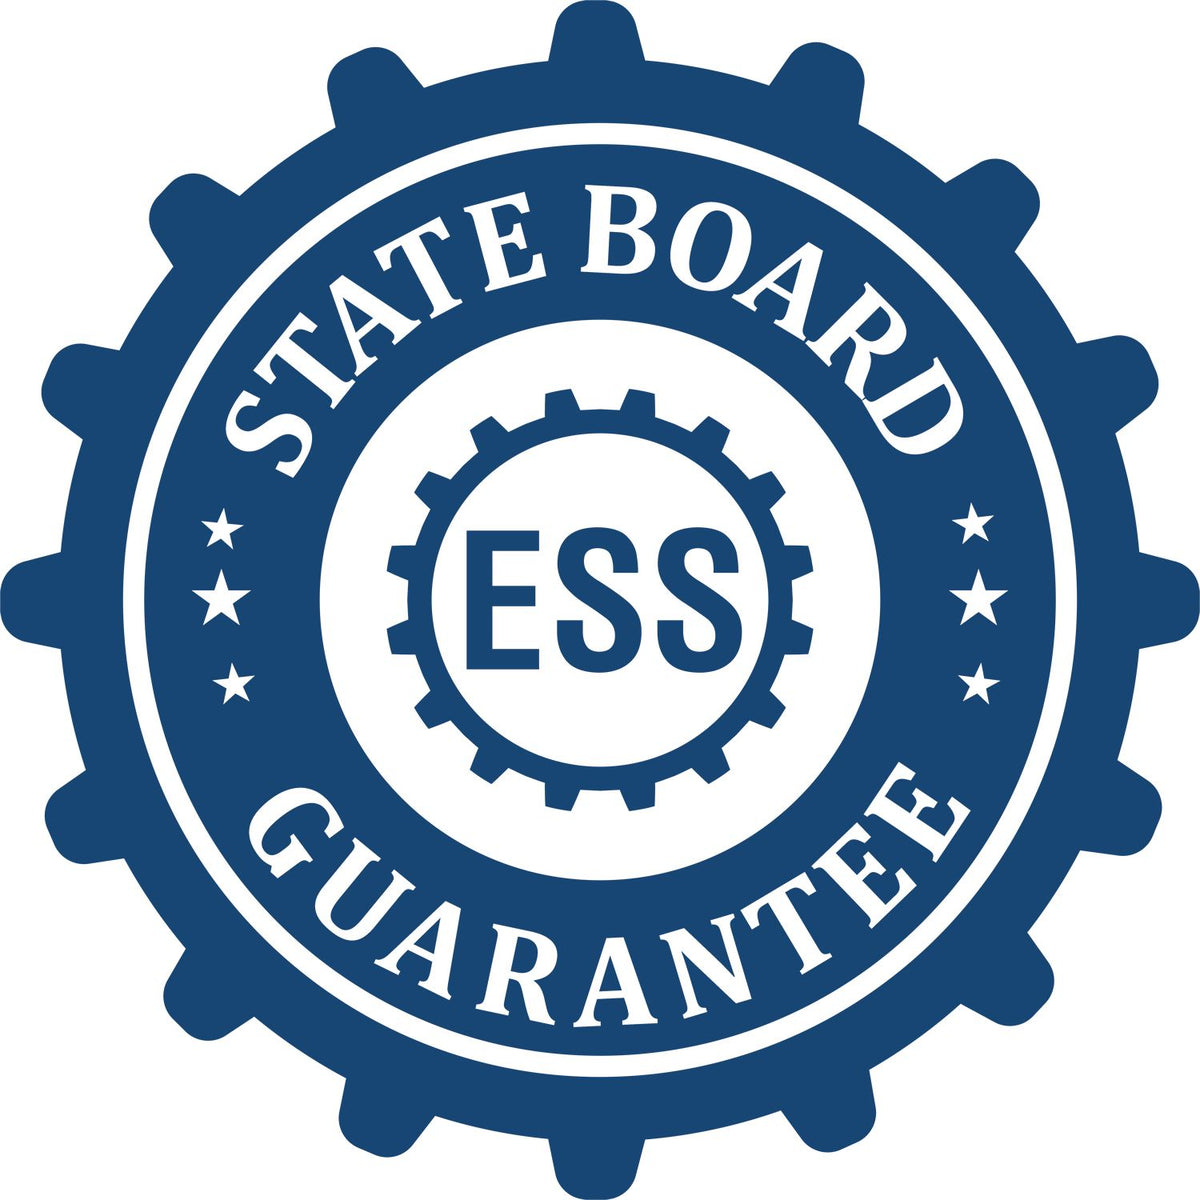 An emblem in a gear shape illustrating a state board guarantee for the State of Connecticut Extended Long Reach Geologist Seal